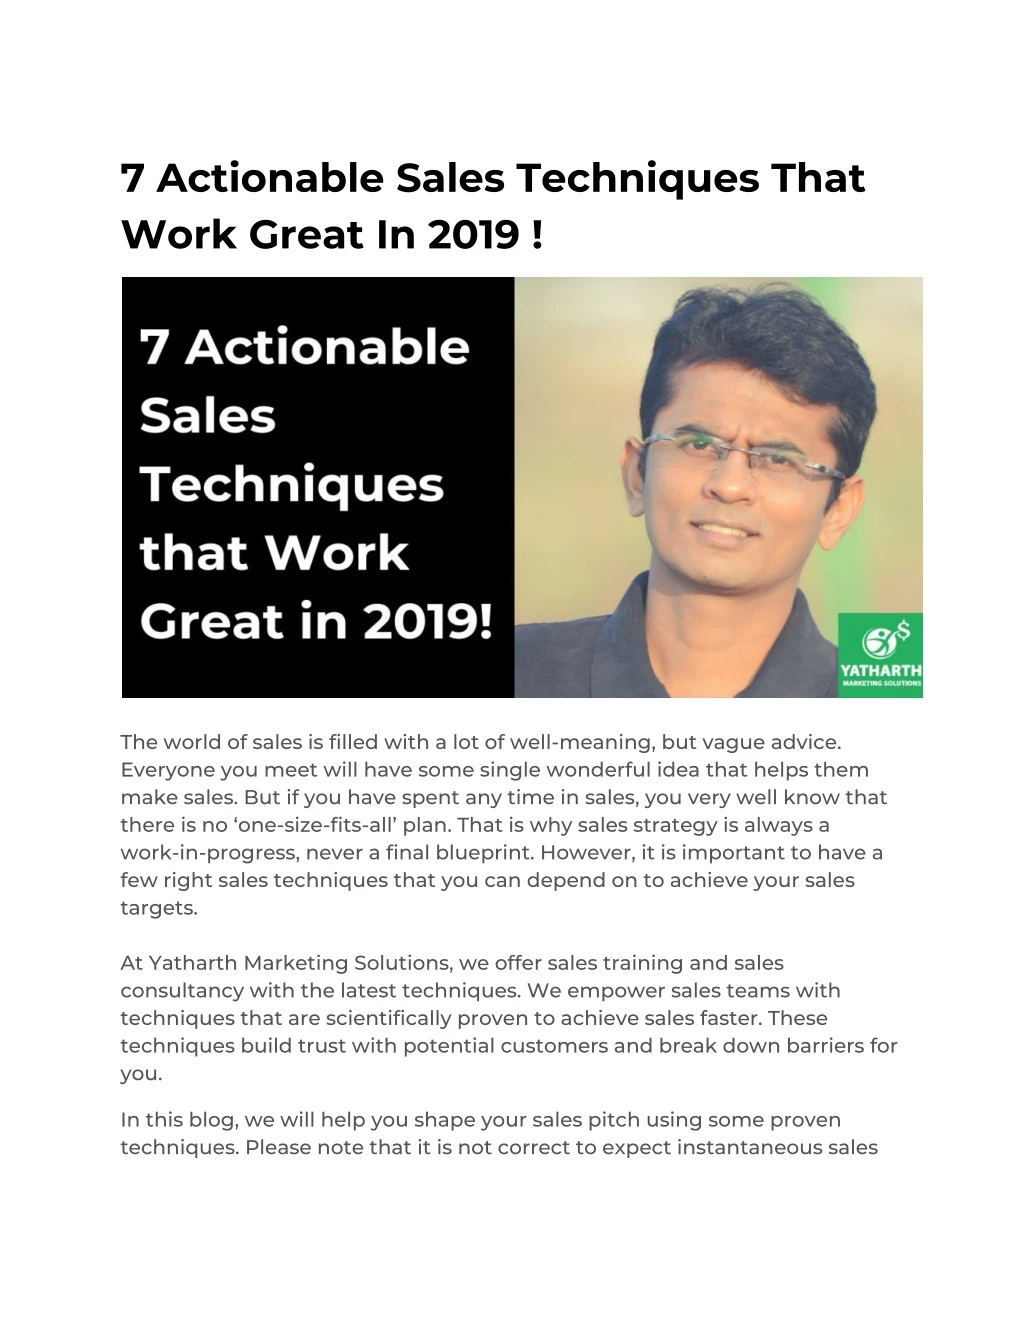 7 actionable sales techniques that work great